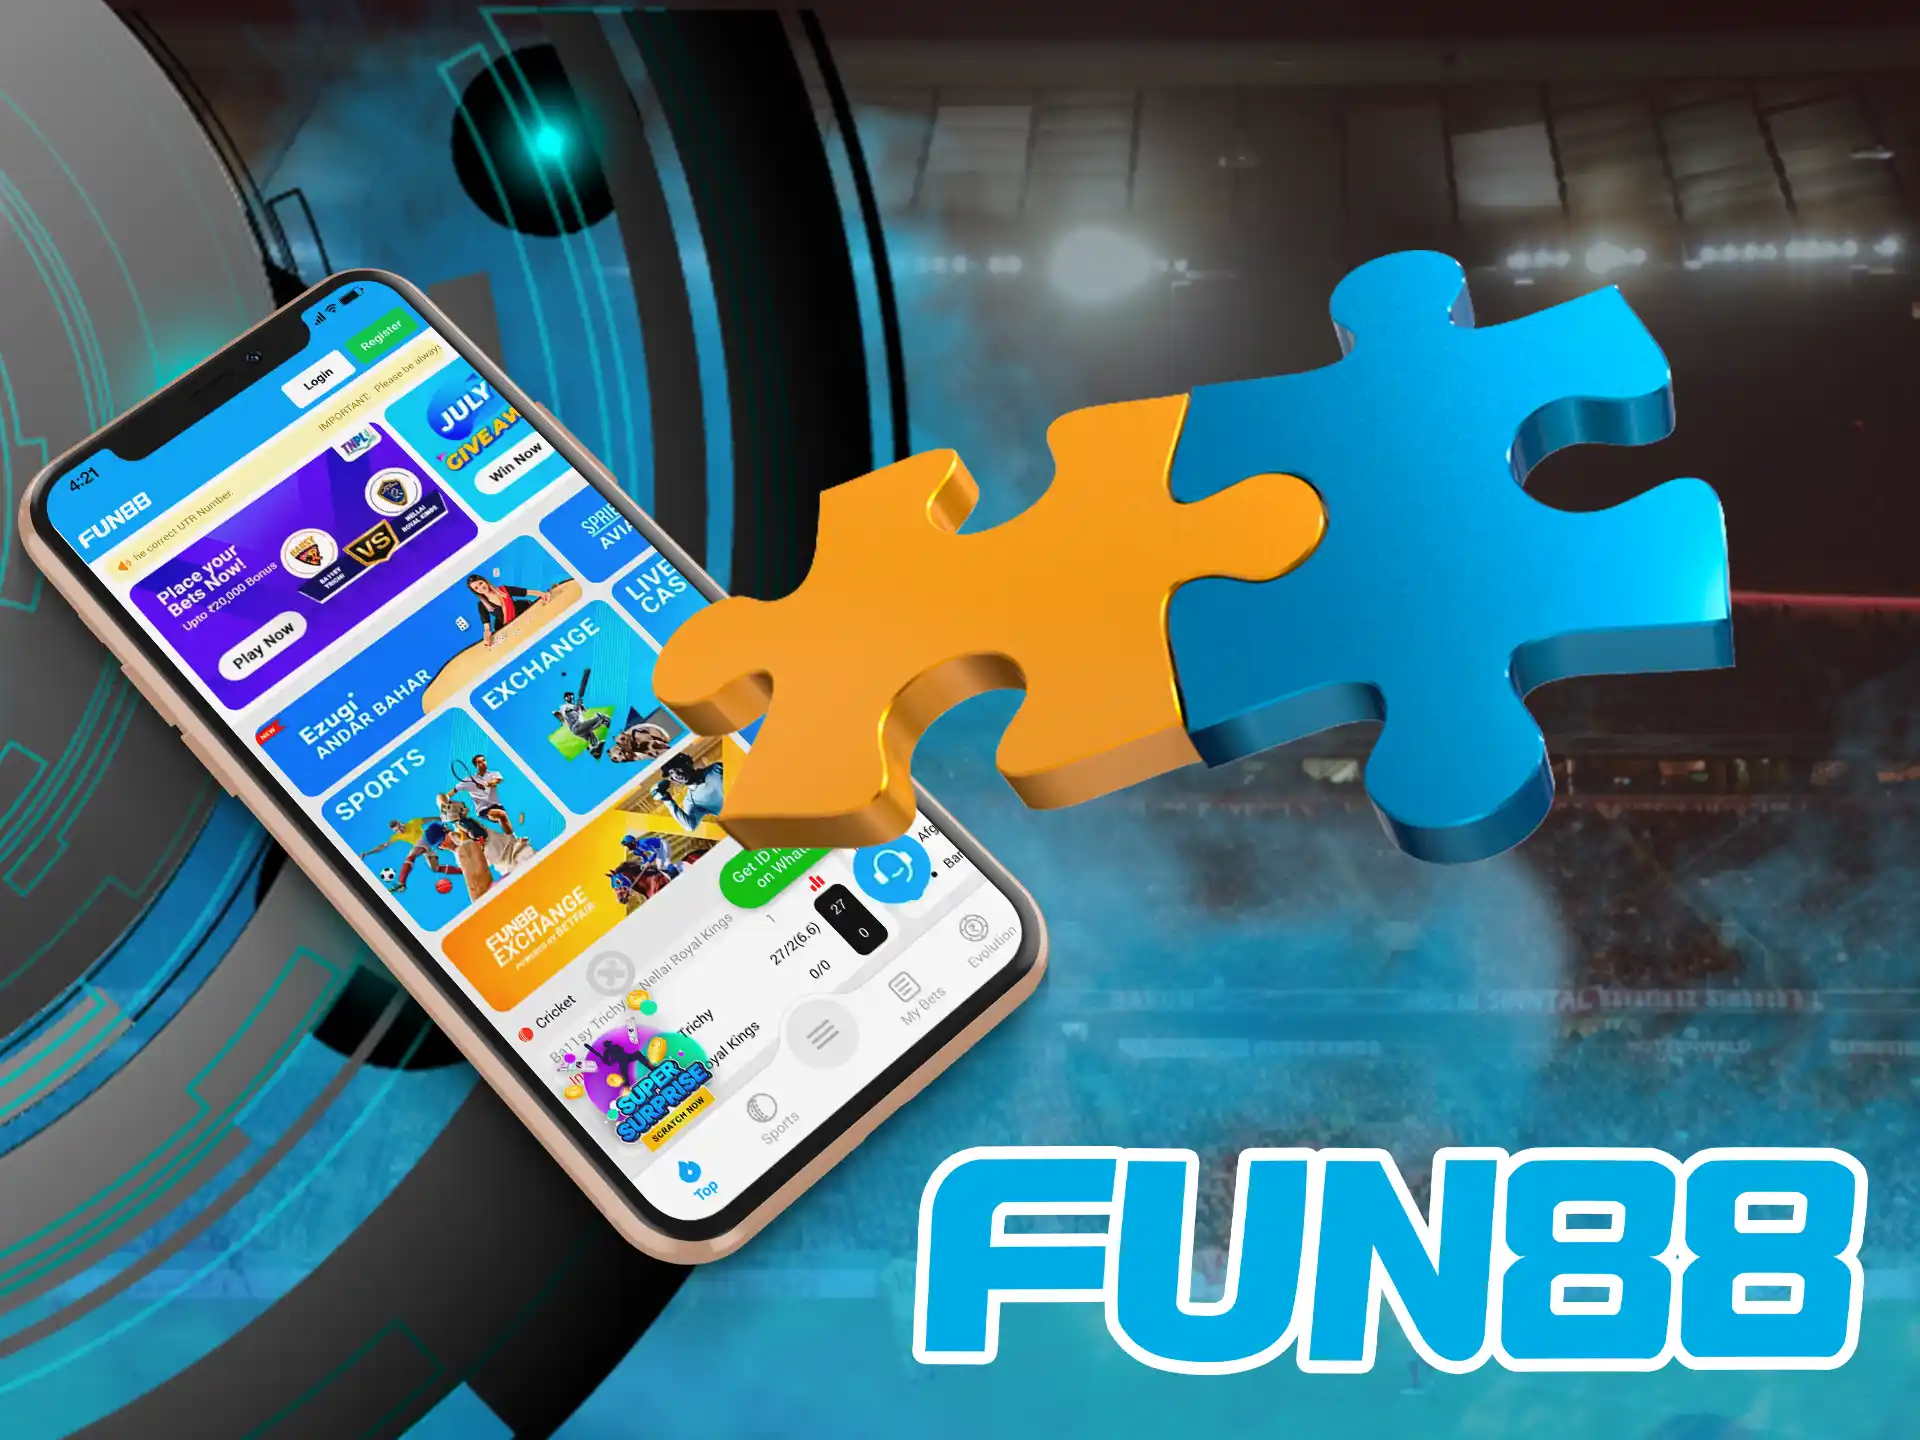 If you are not yet familiar with all the options in the Fun88 app, our article will introduce them to you.